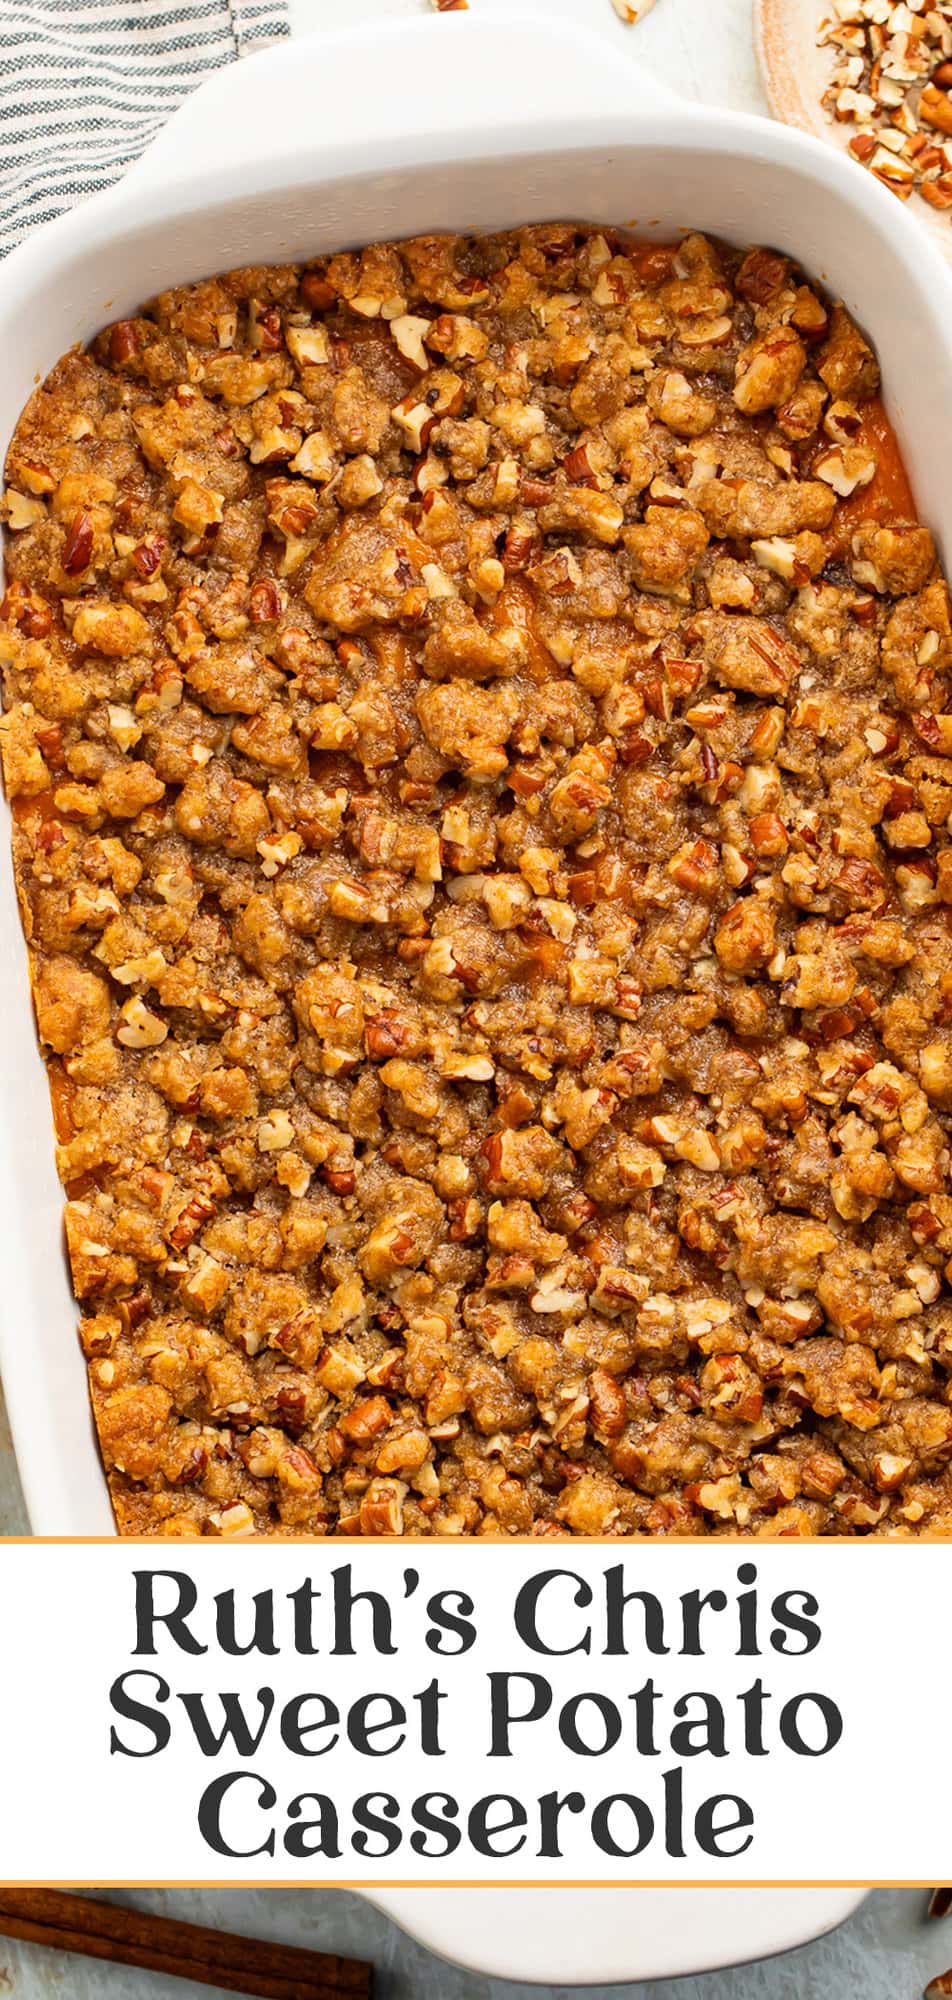 Pin graphic for Ruth's Chris sweet potato casserole.